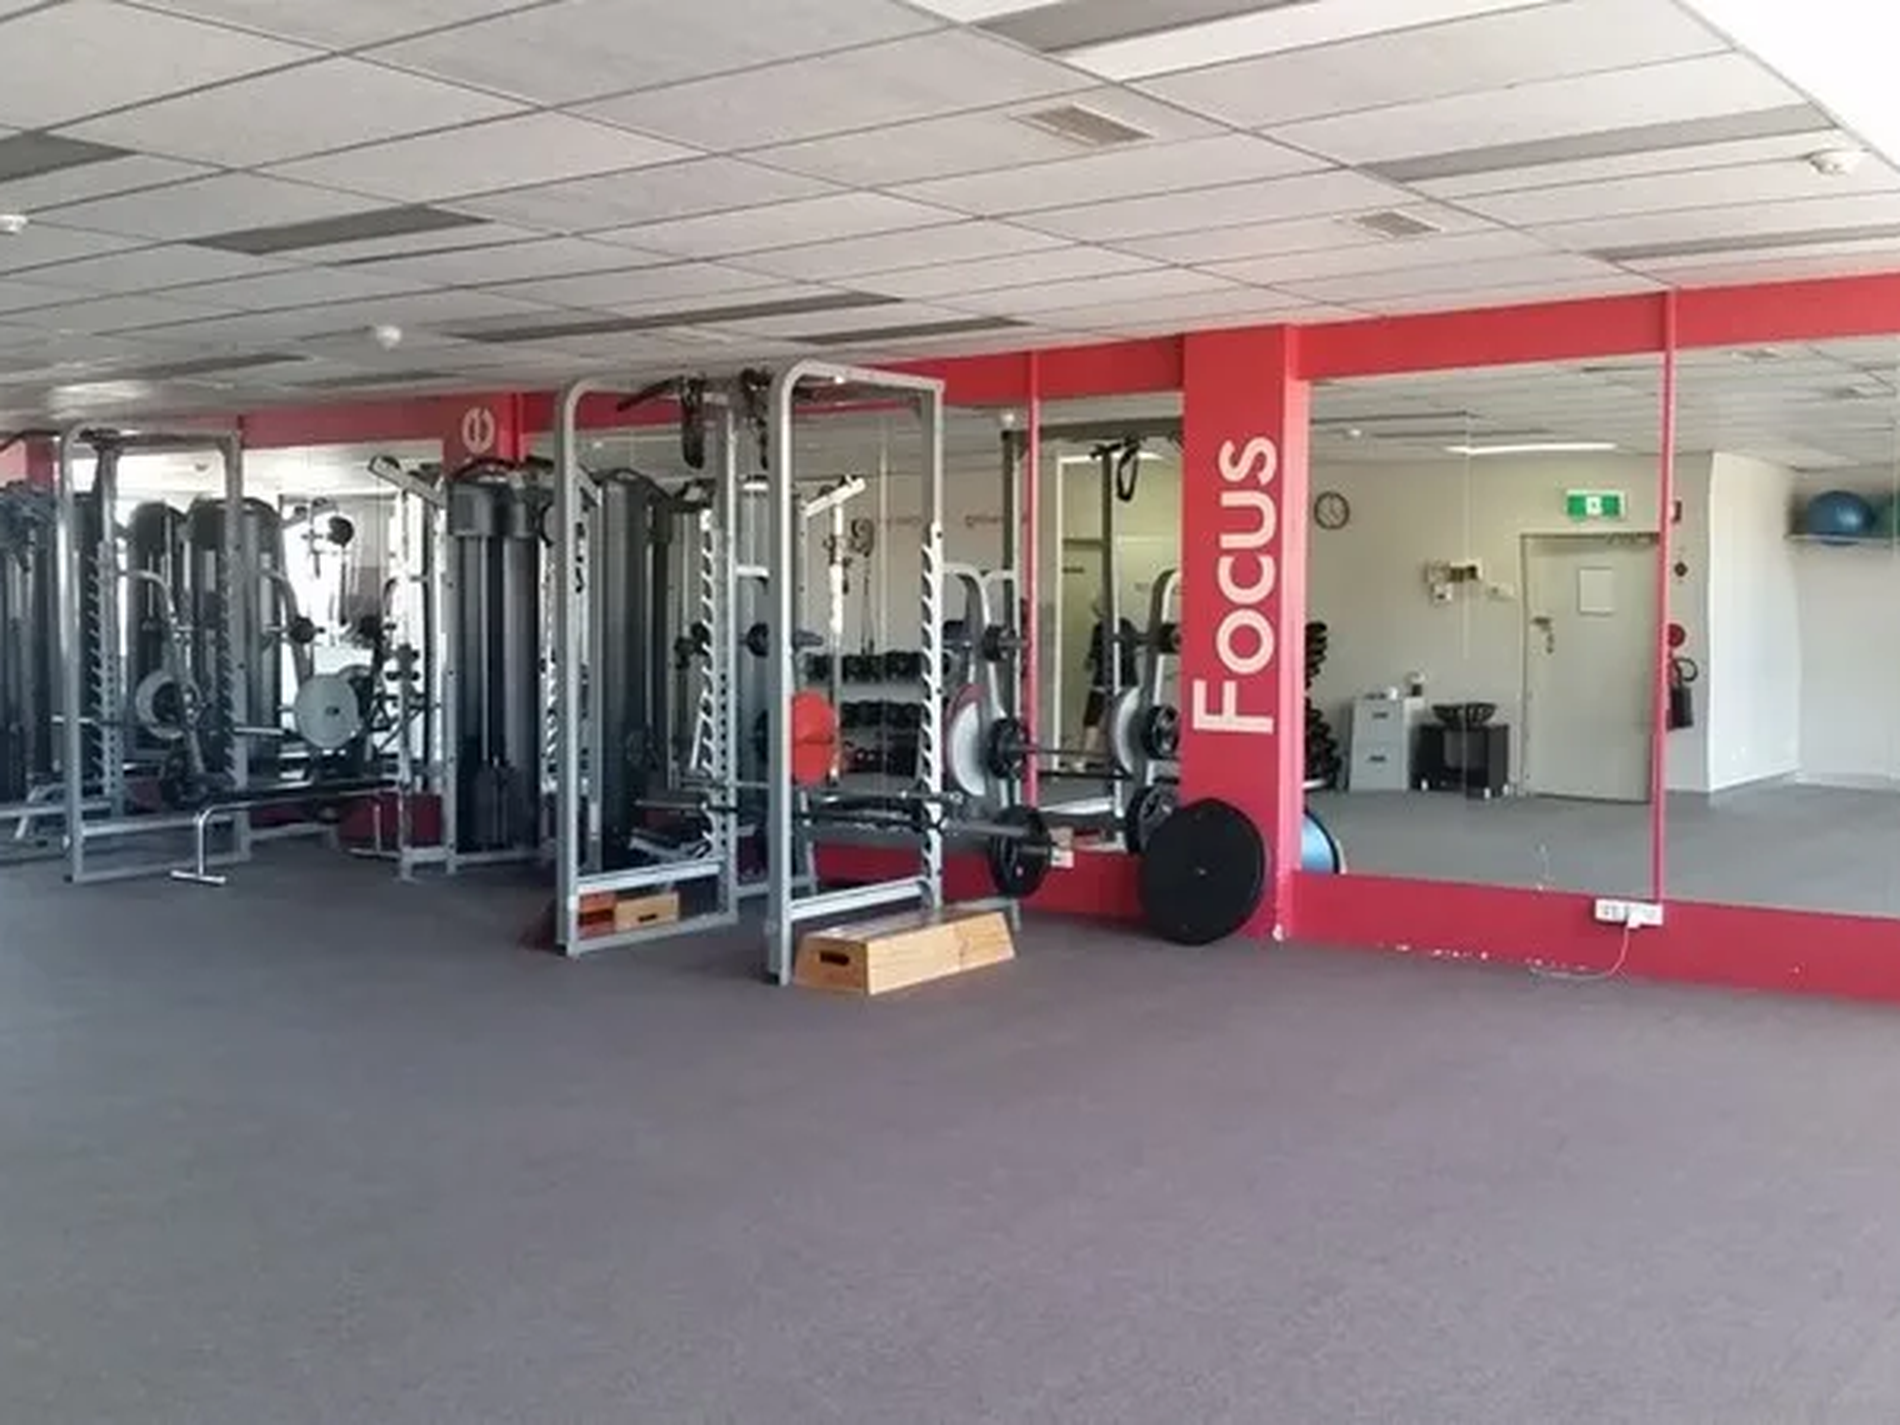 SOLD Personal Training Studio Business for Sale
